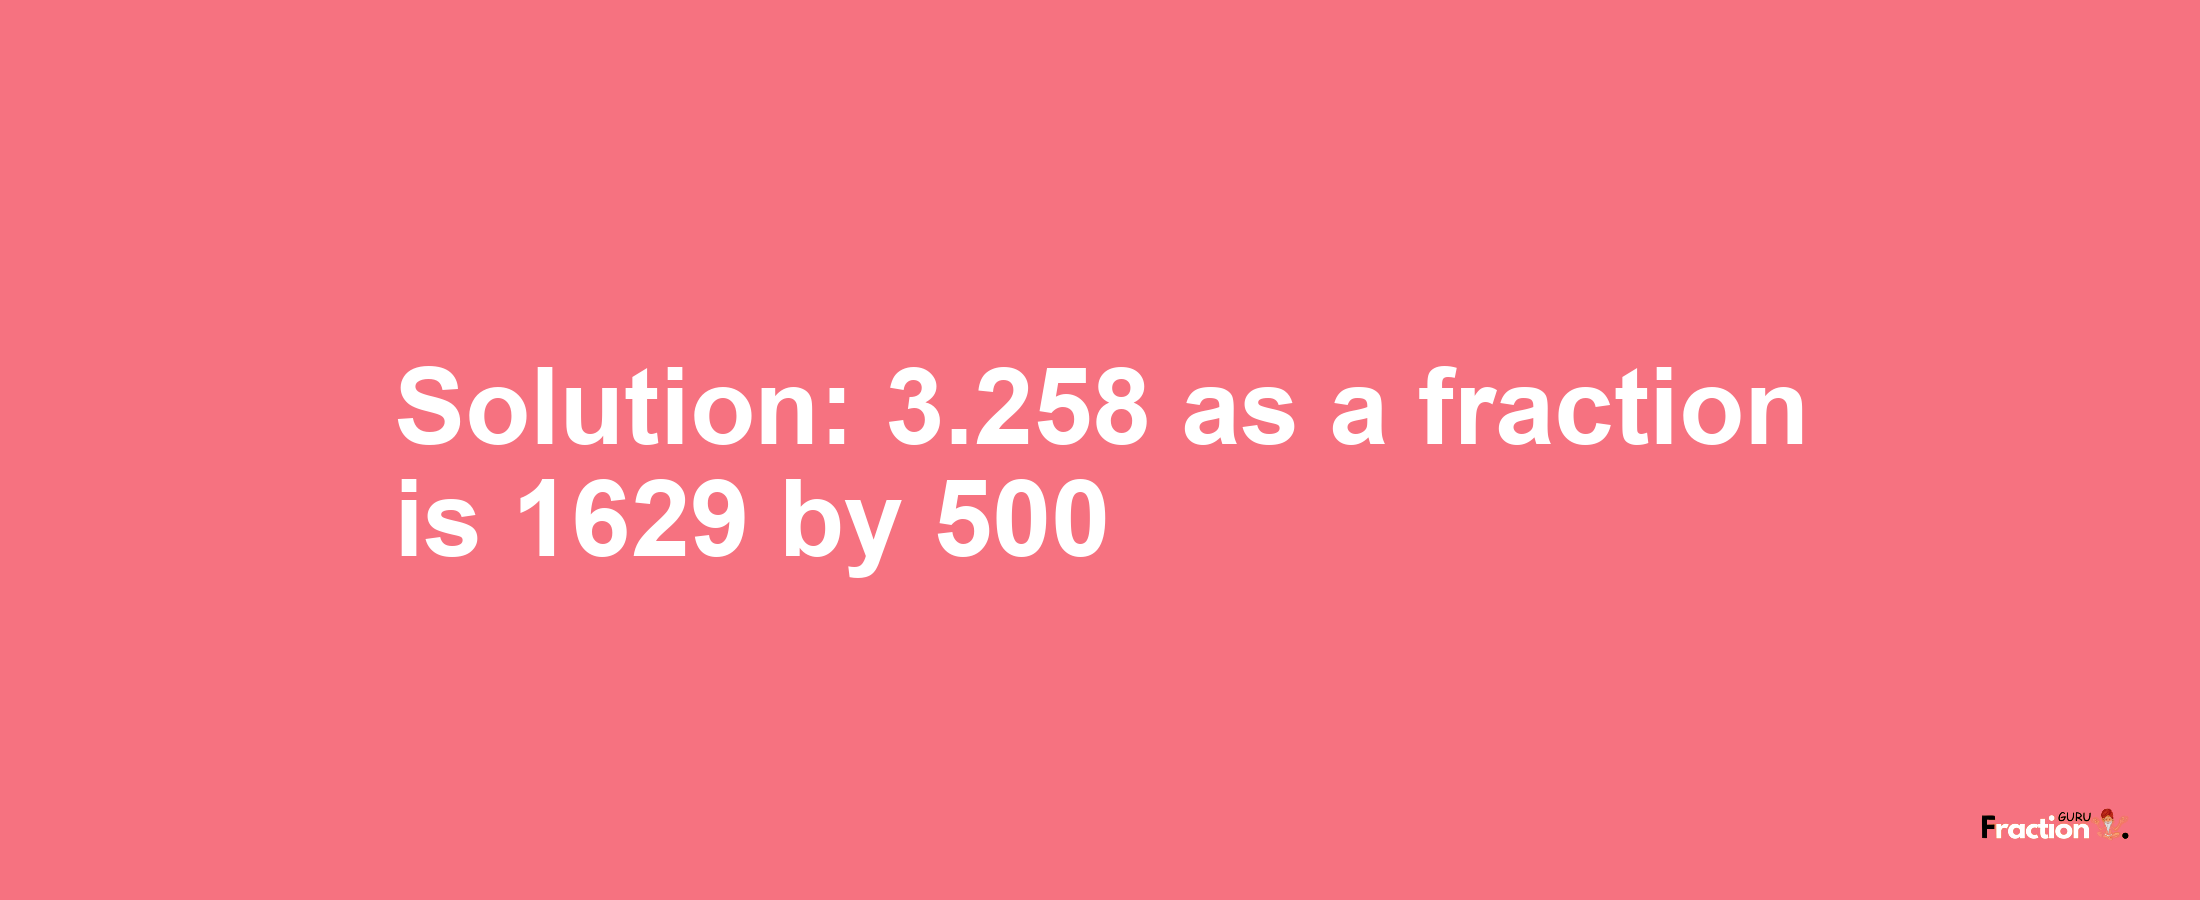 Solution:3.258 as a fraction is 1629/500